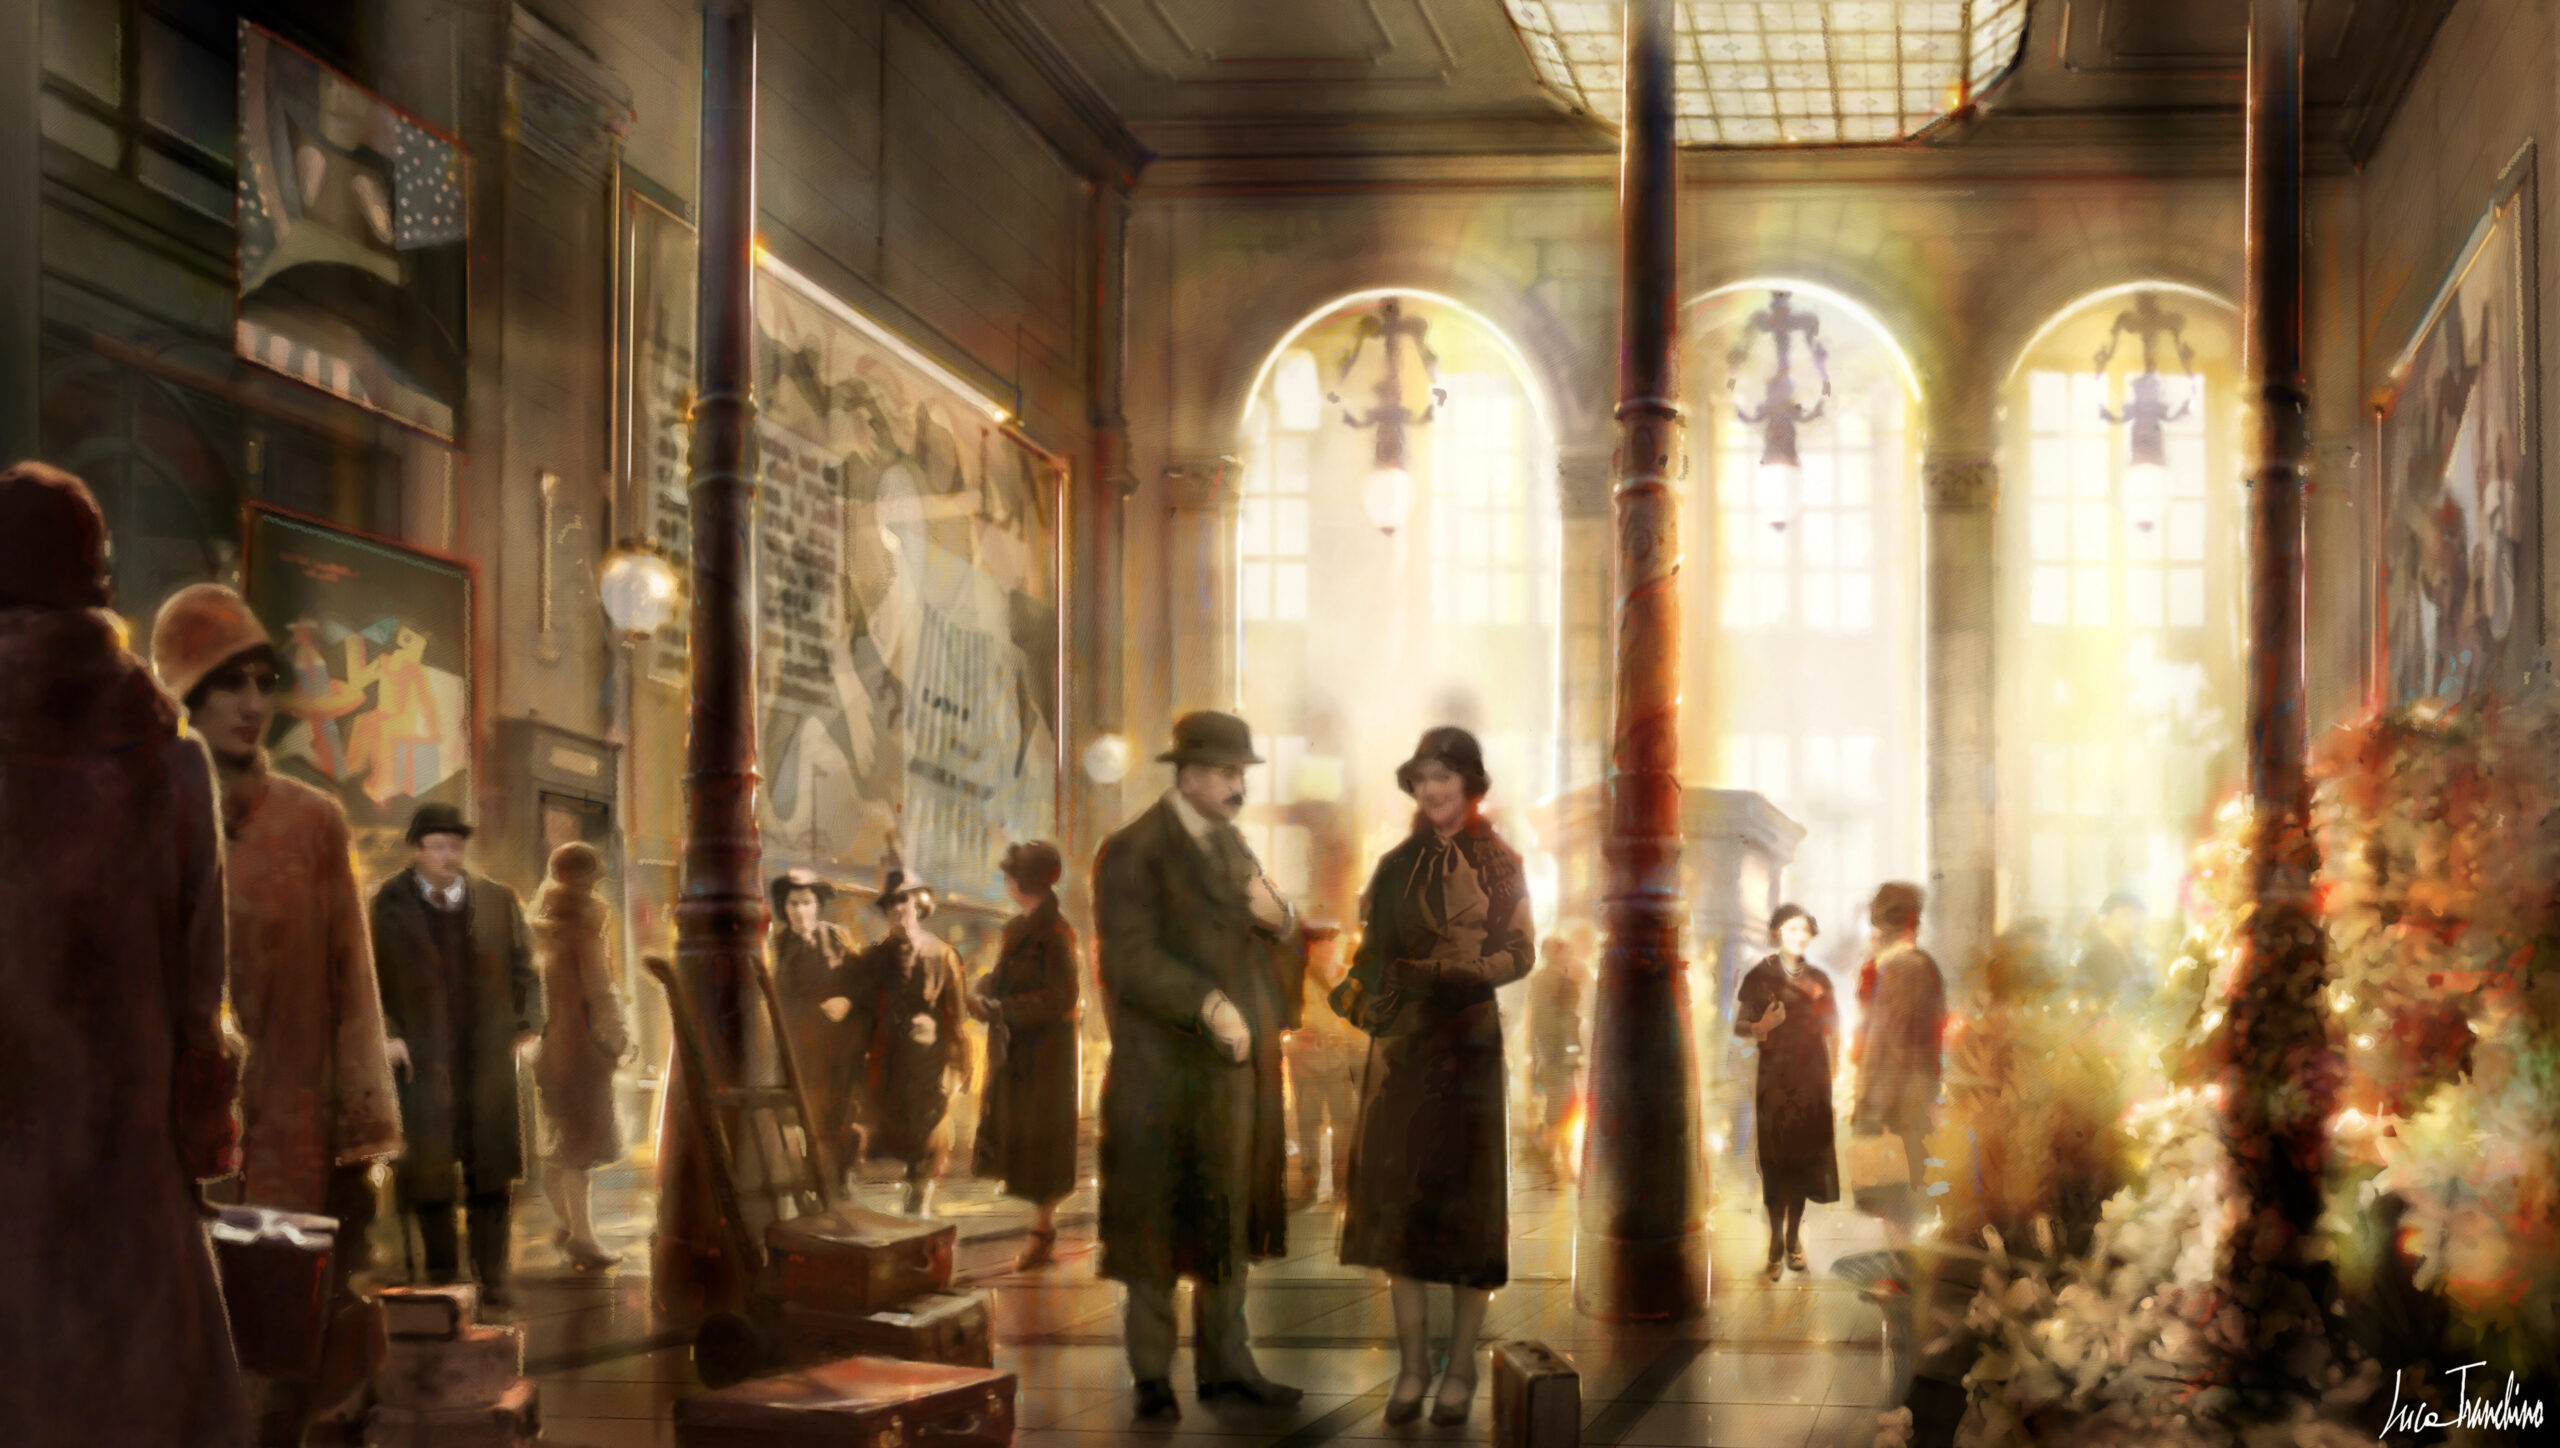 HUGO - Directed by Martin Scorsese - Int. Montparnasse Station 1931, Concept Art by Luca Tranchino - ©2011 - Sony Pictures